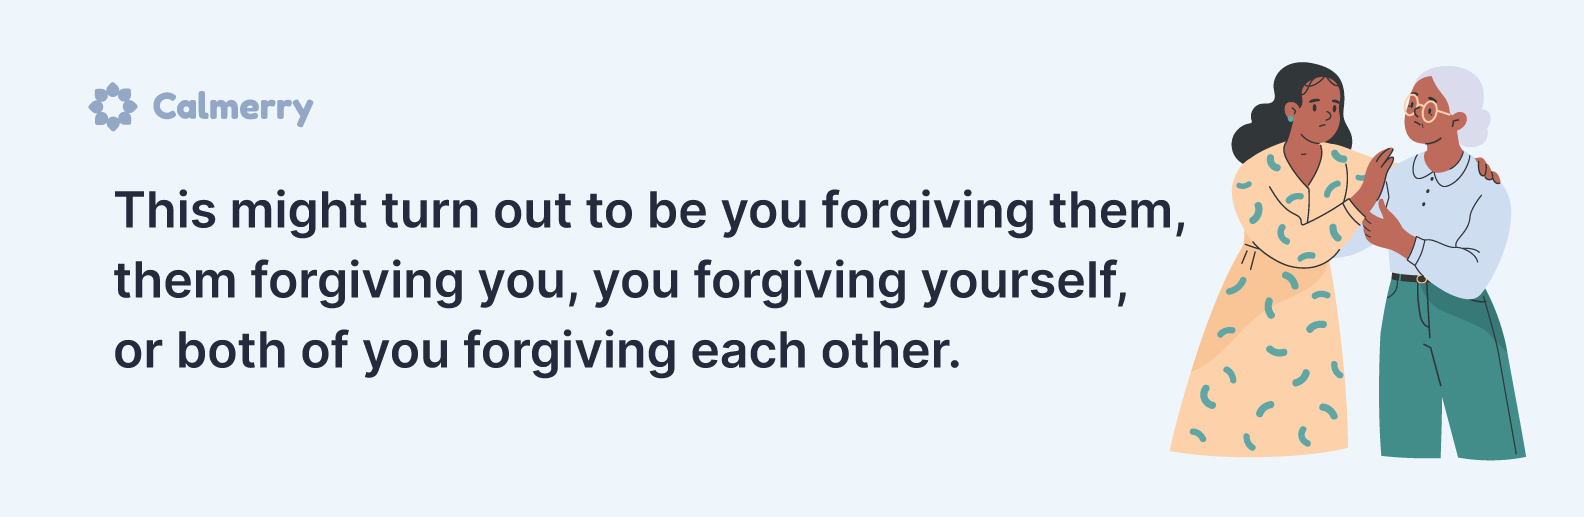 When possible, forgive